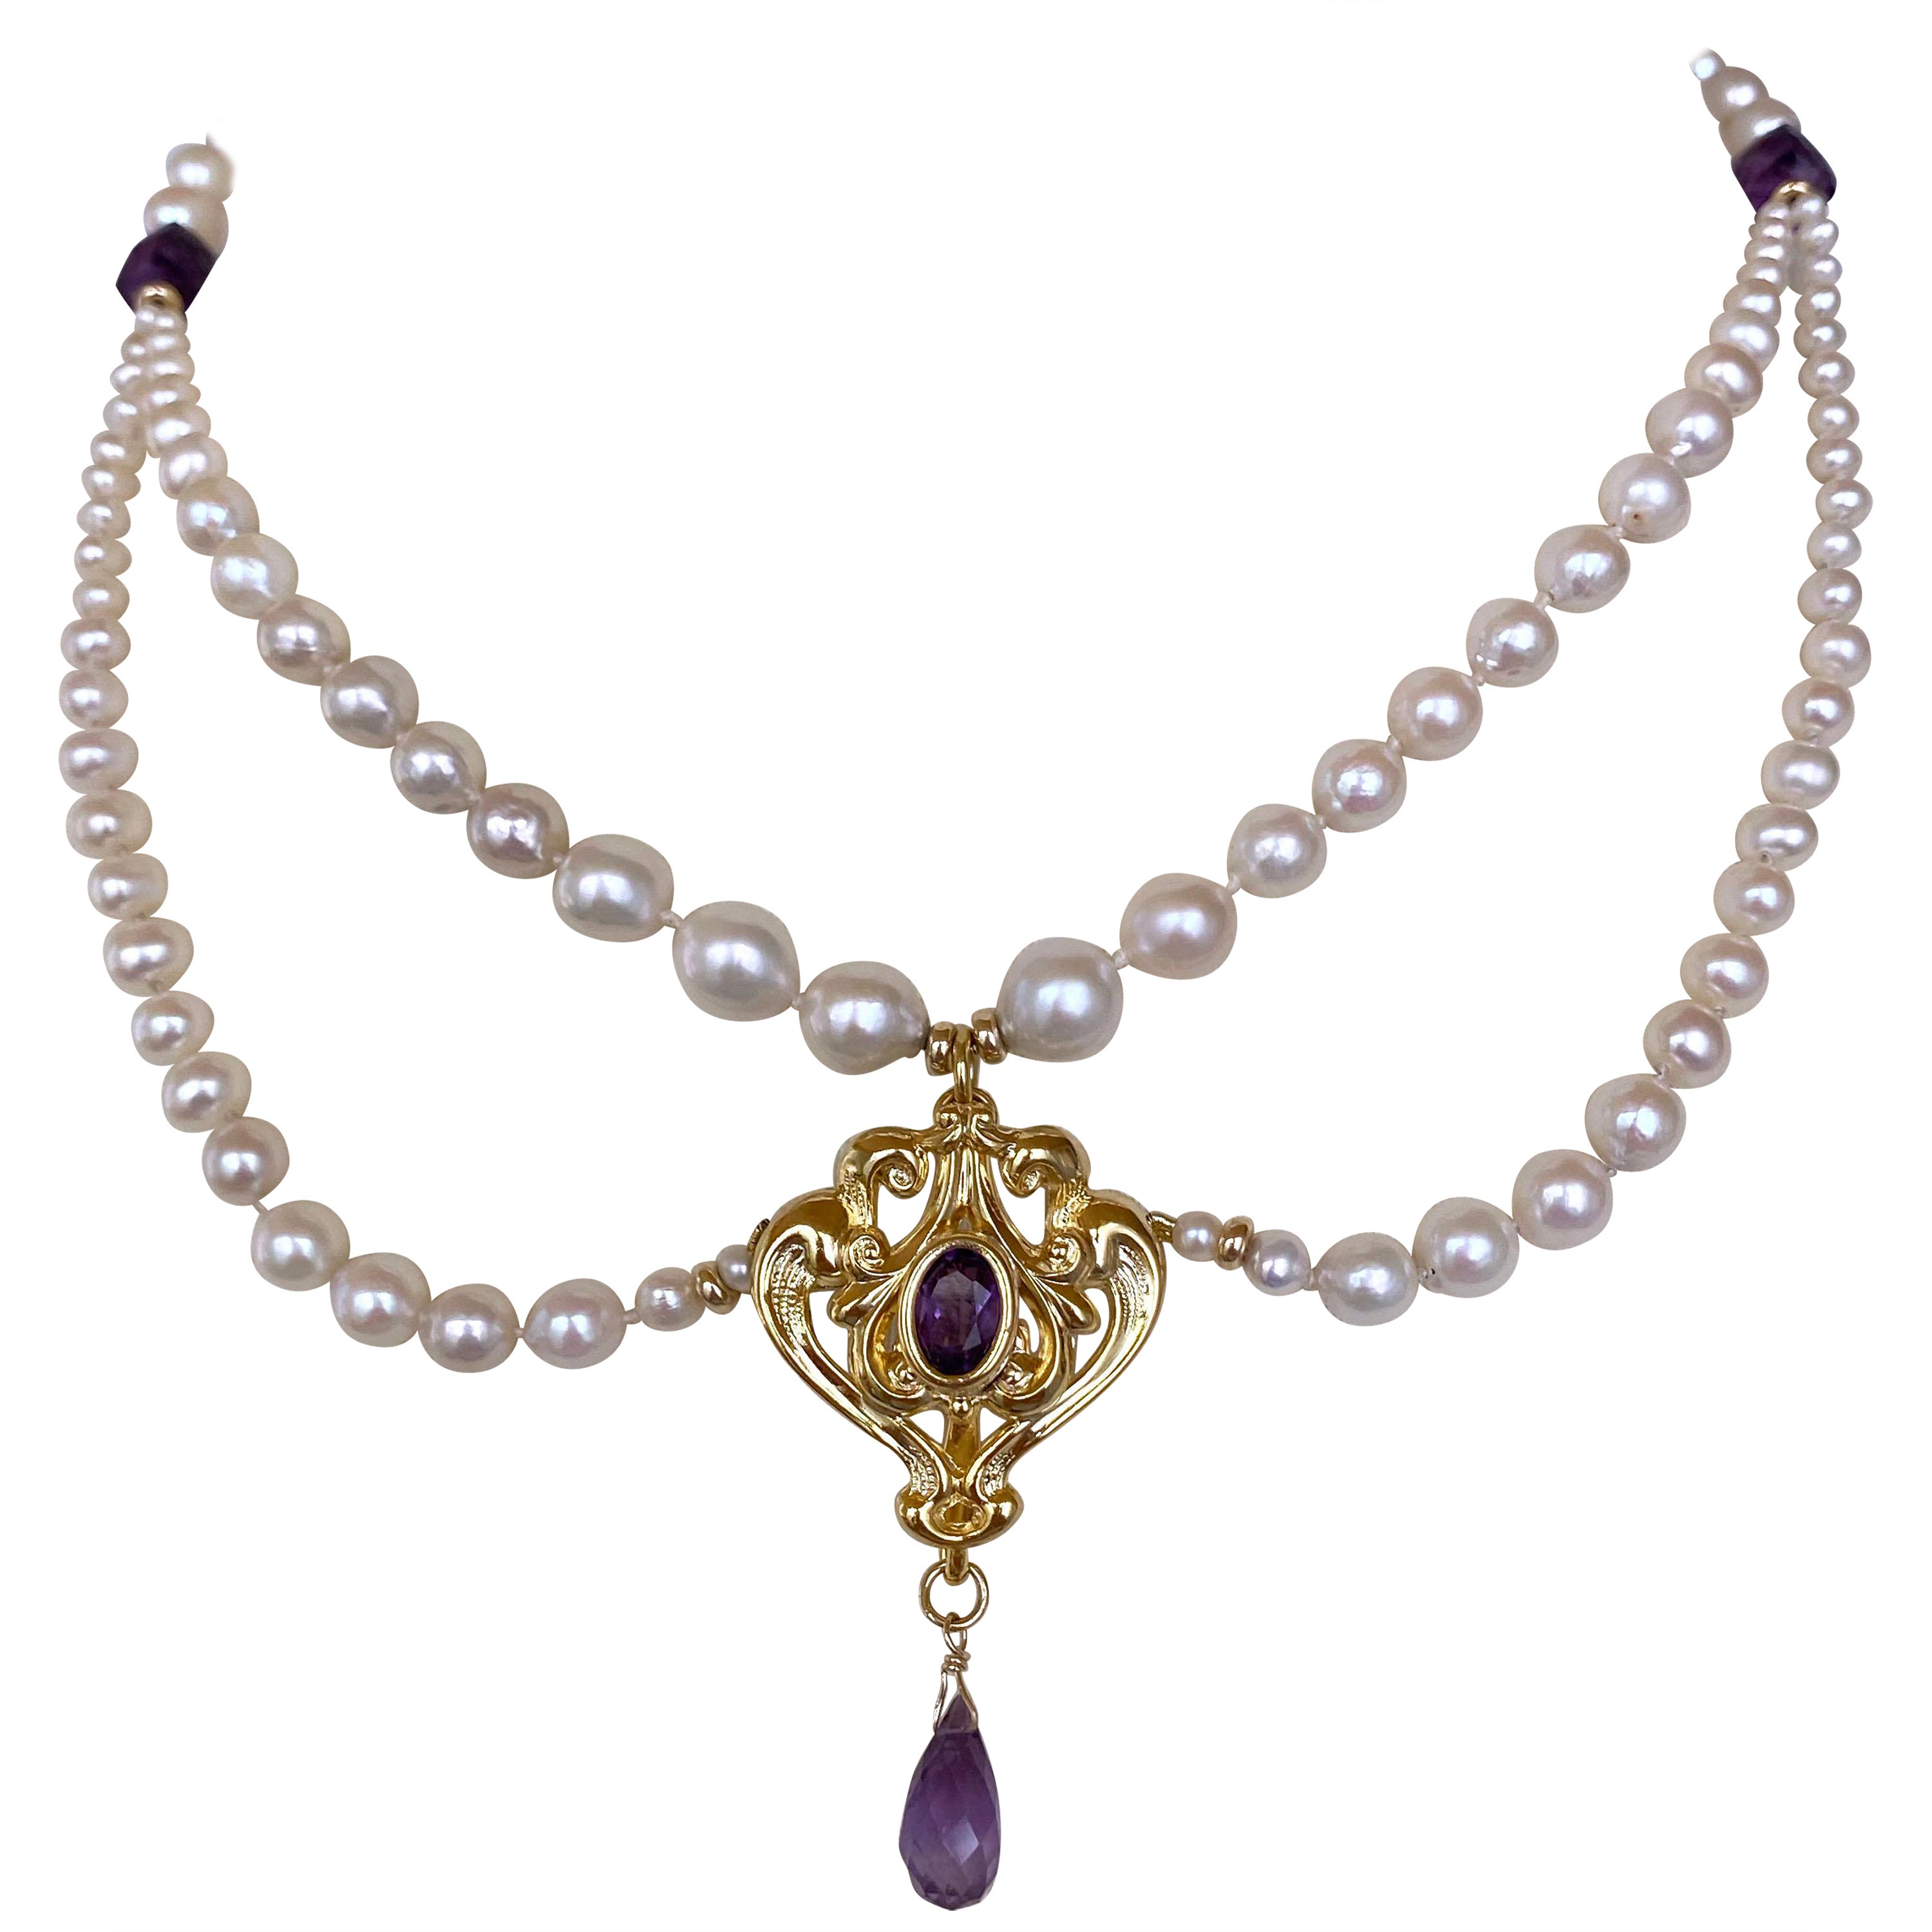 Marina J. Graduated Pearl and Amethyst Necklace with 14K Yellow Gold